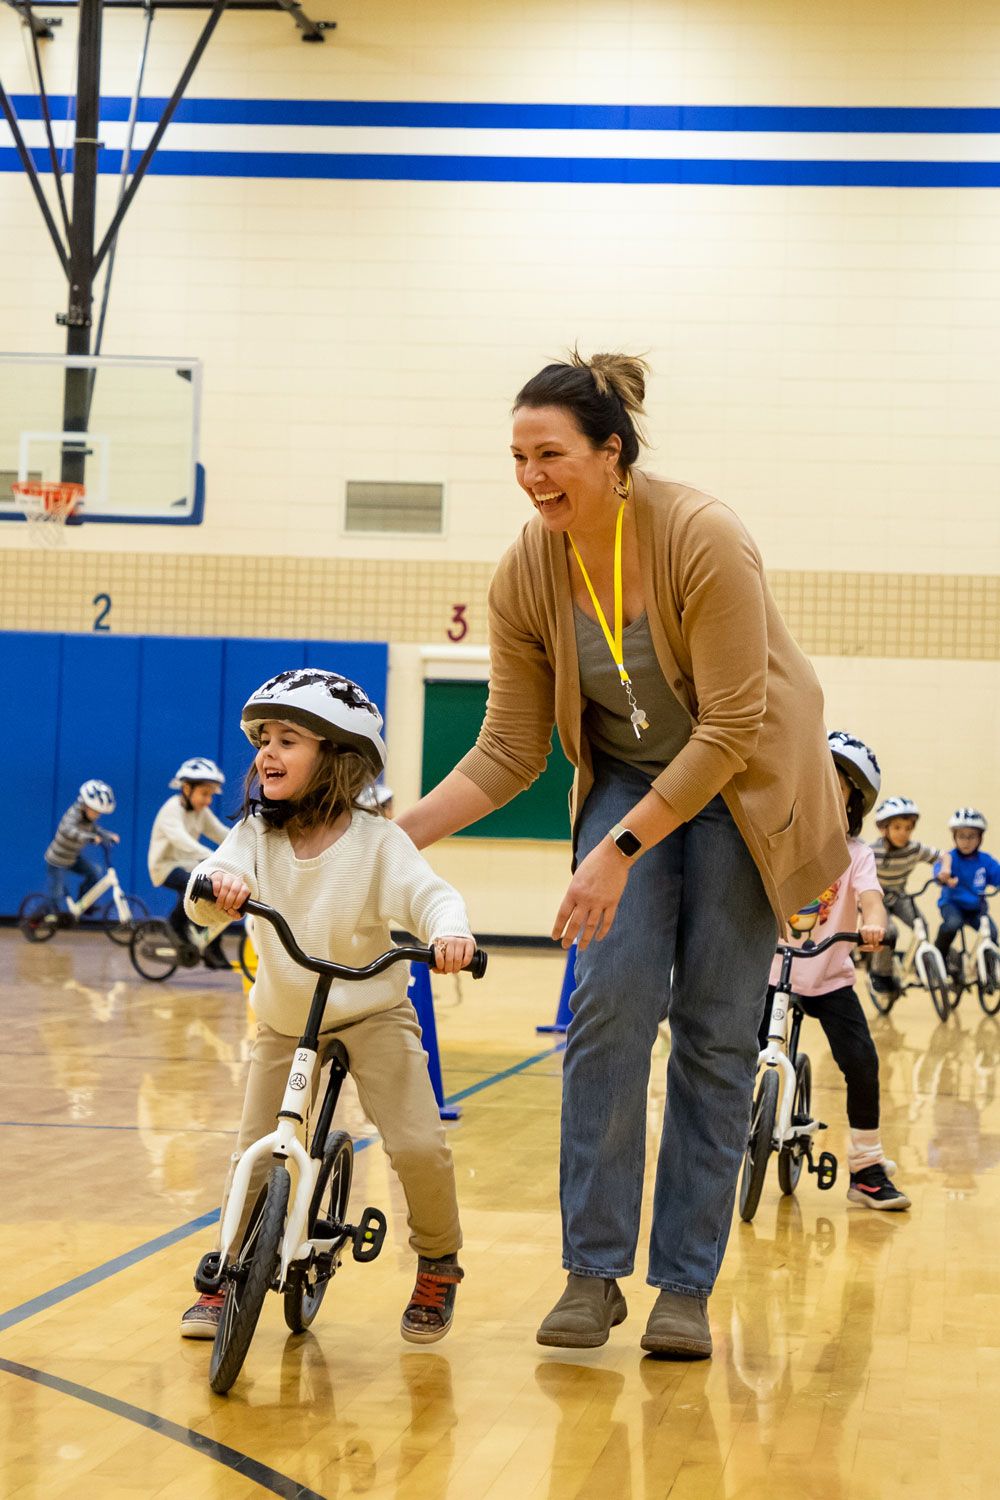 A teacher smiles while helping a girl learn to pedal in the All Kids Bike Kindergarten PE Program